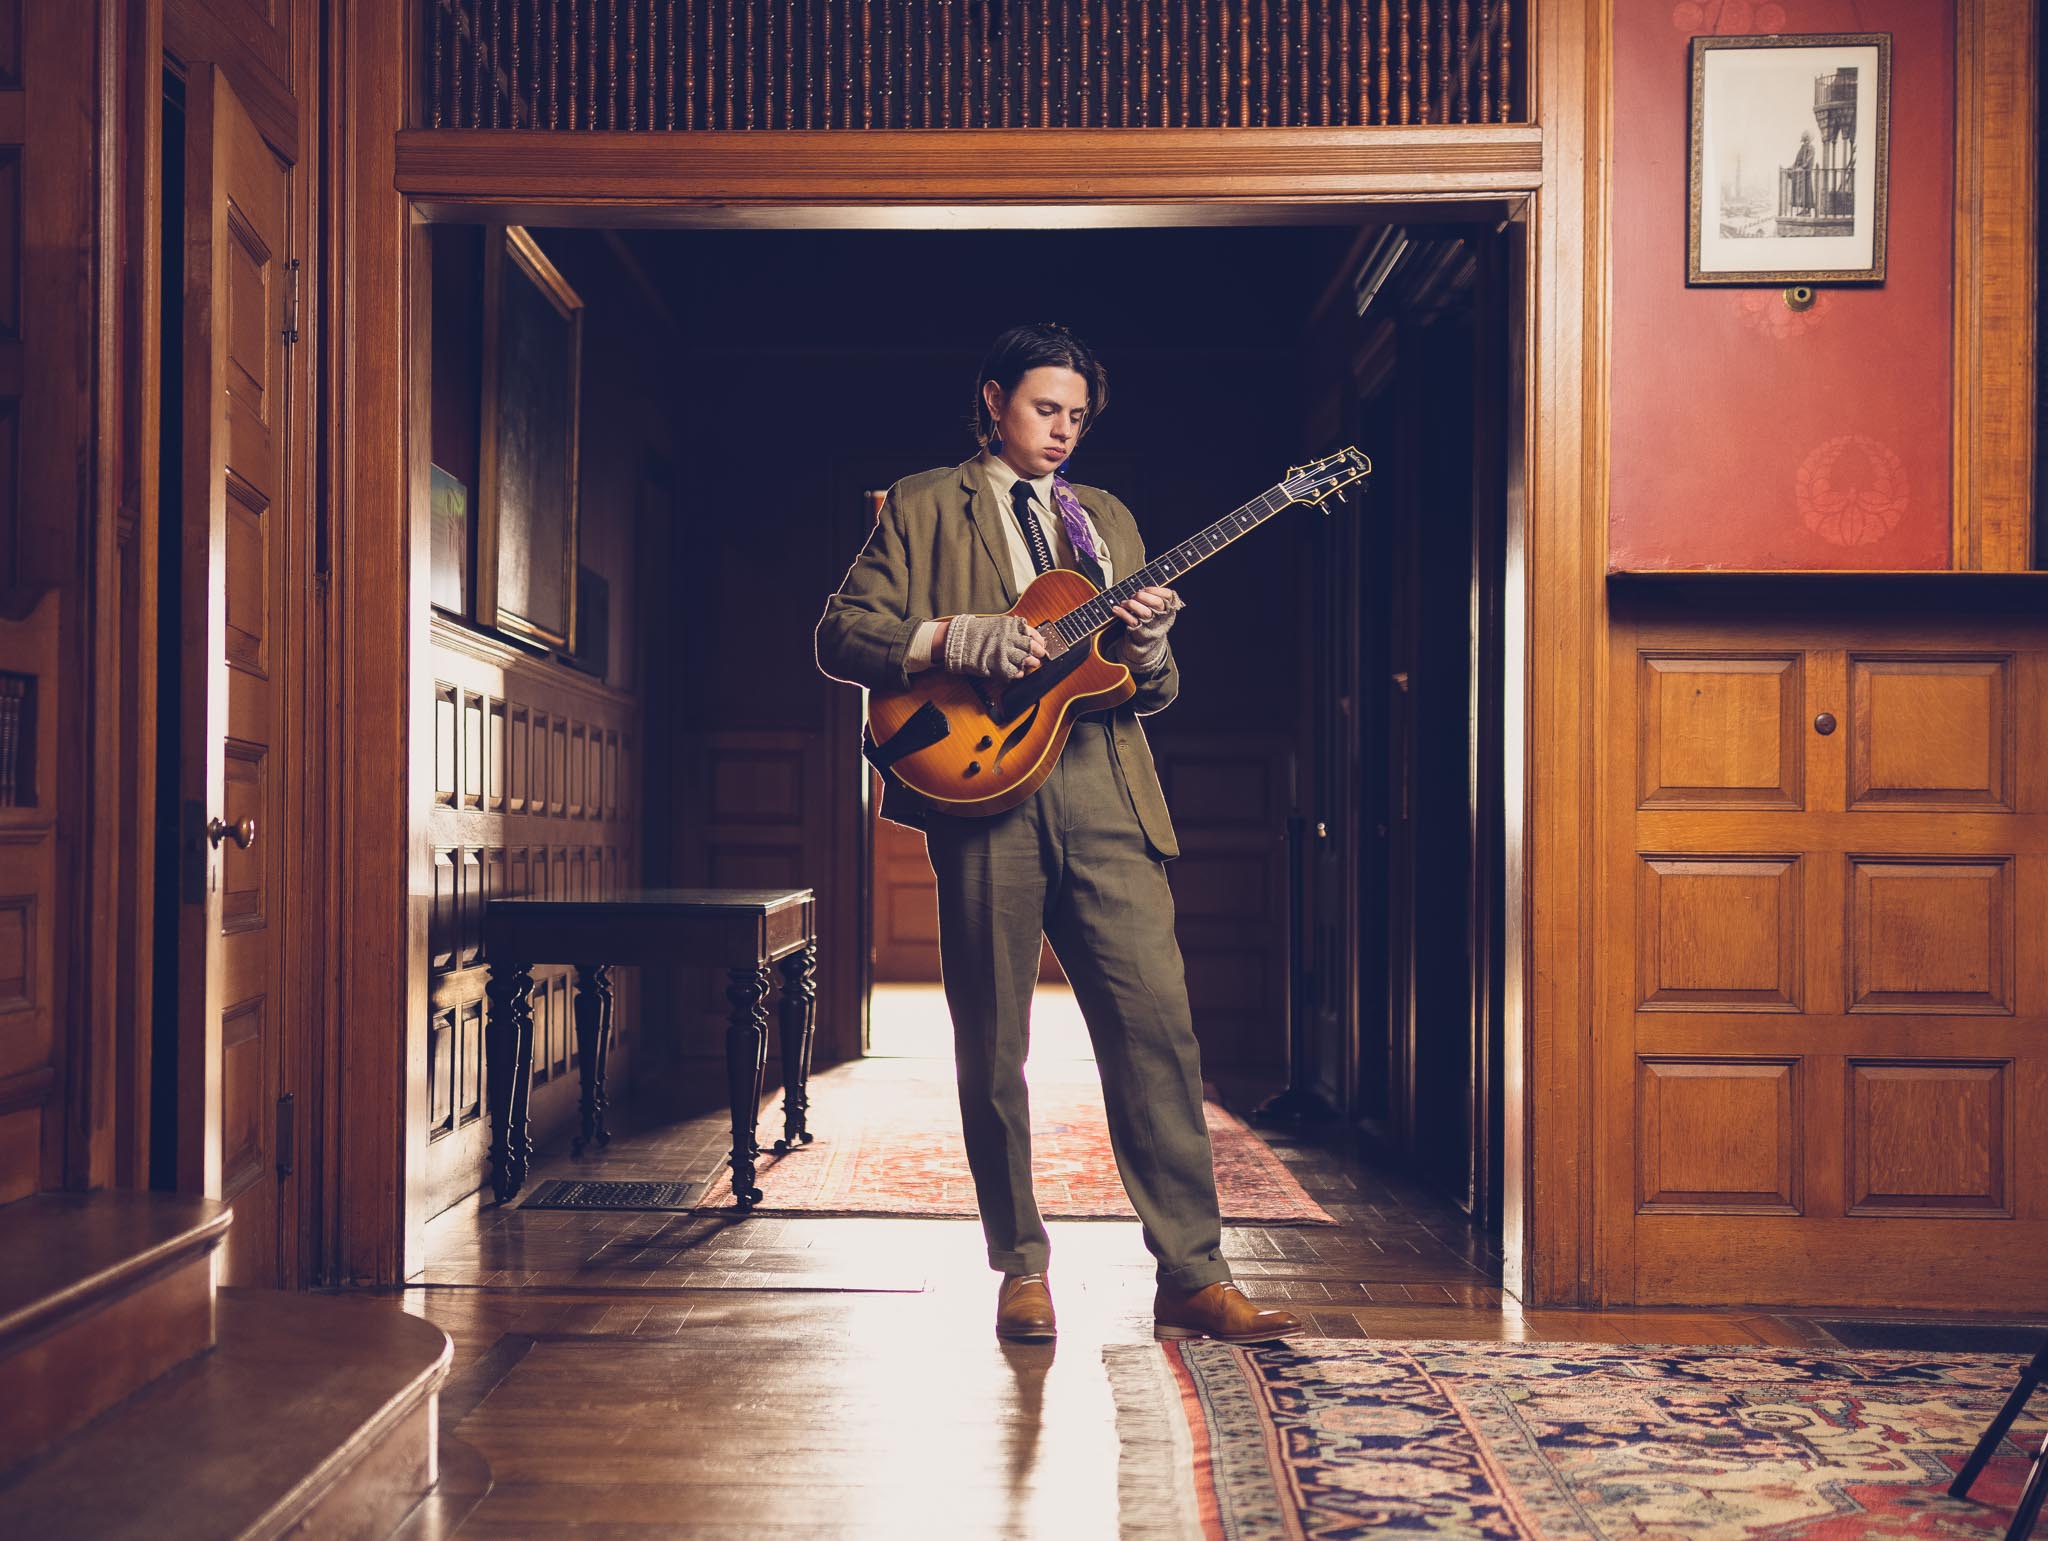 Senior portrait of a young man wearing a suit and playing a guitar inside a historic mansion in Massachusetts